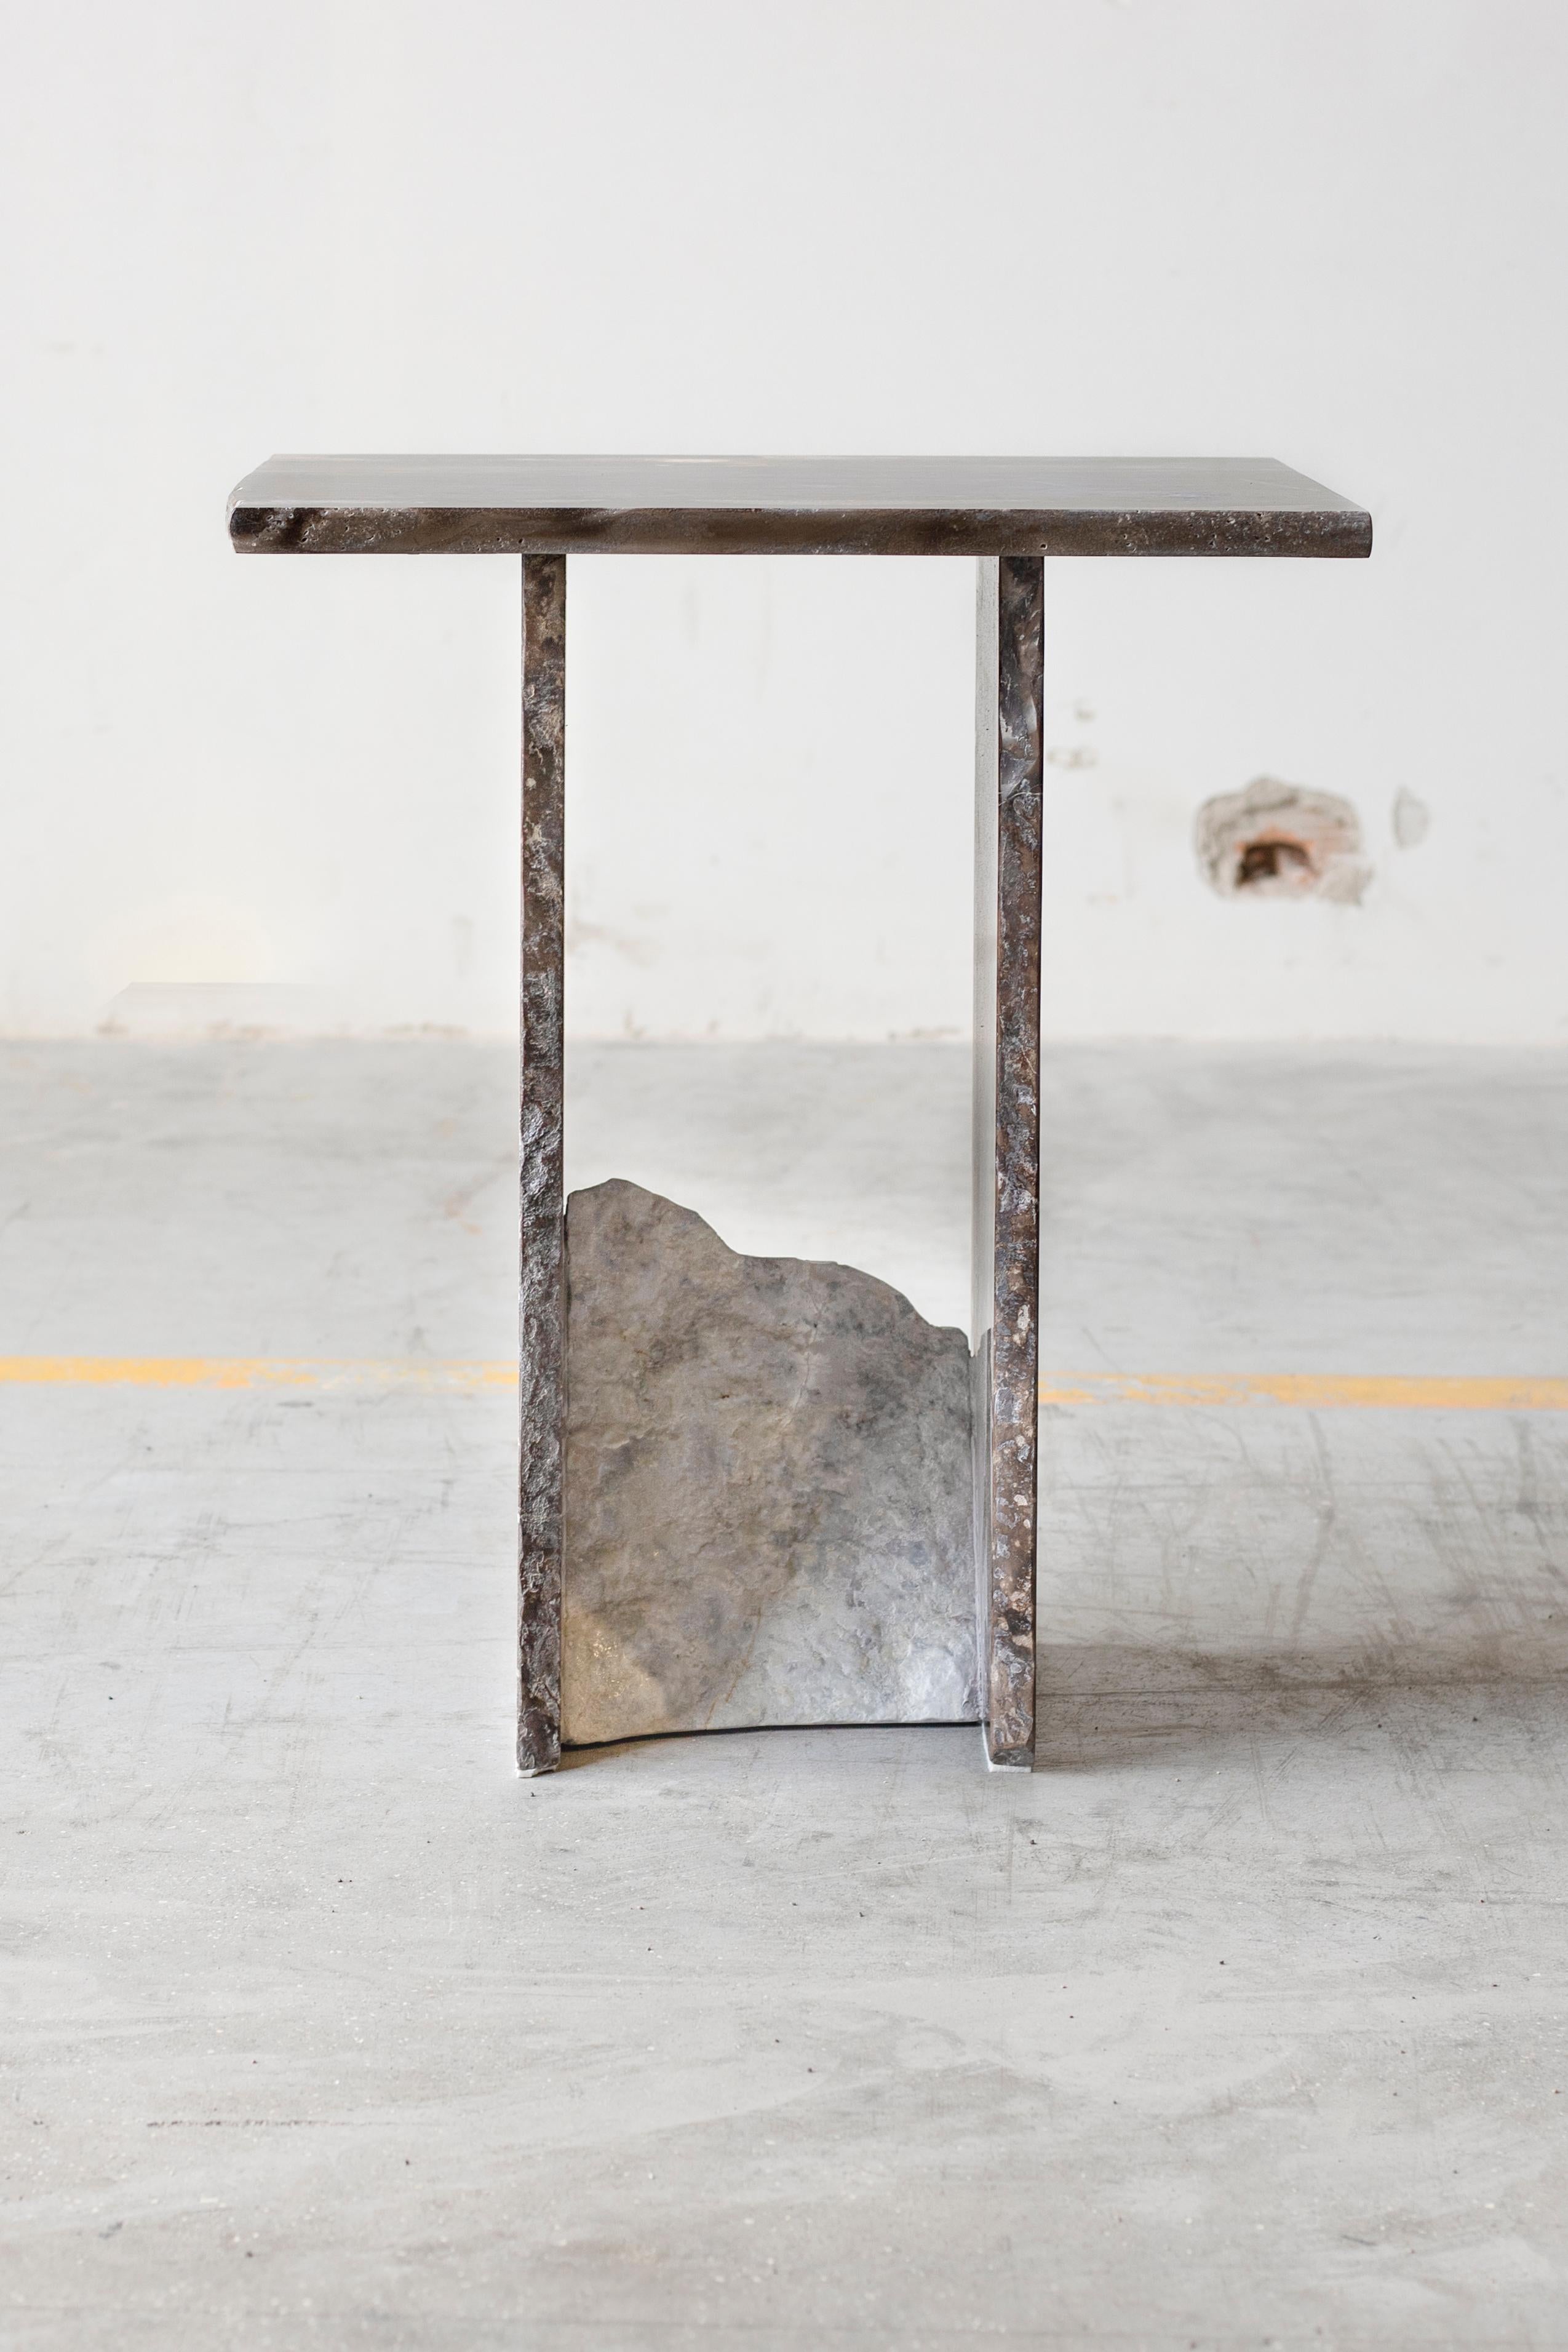 SST013-2 side table by Stone Stackers
Dimensions: D 36 x W 44.5 x H 45 cm
Materials: Frappuccino marble, Invisible Grey marble.
Marble Structure: Frappuccino
Marble Base: Invisible Grey
Weight: 23 kg

This side table is part of a set of two pieces.